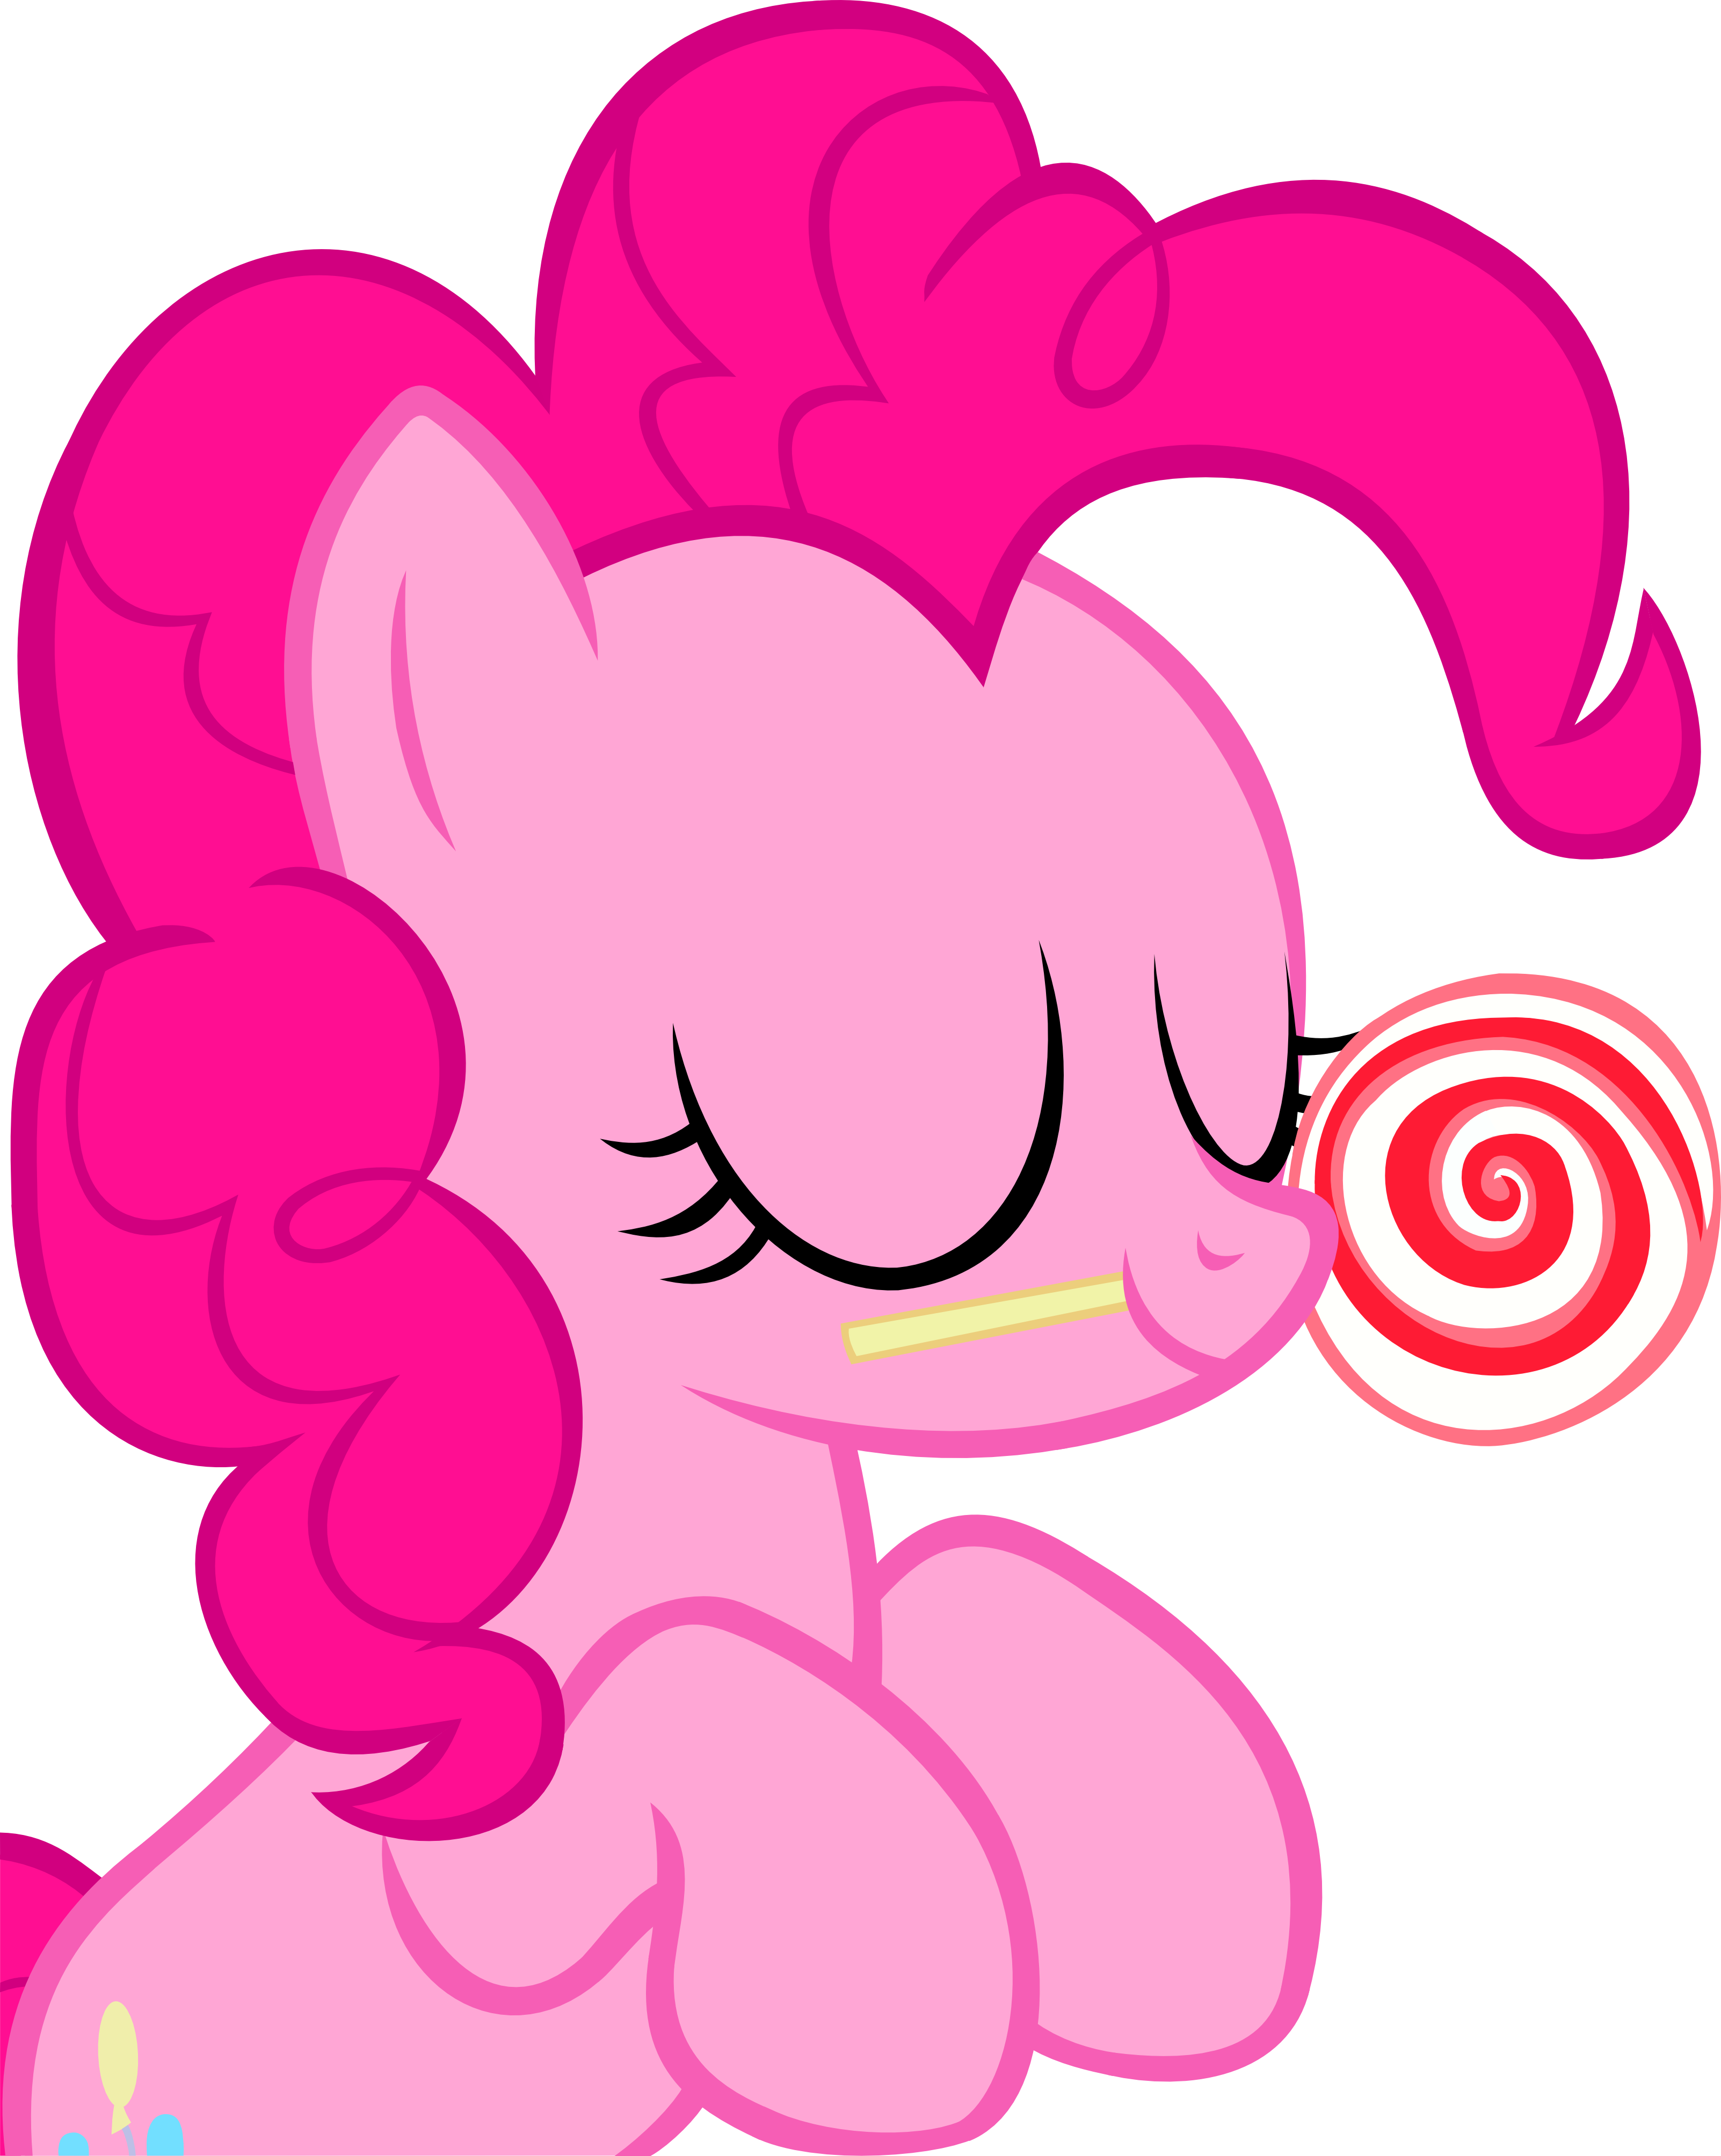 pinkie_with_a_lolly_by_ironm17-dazr0og.p